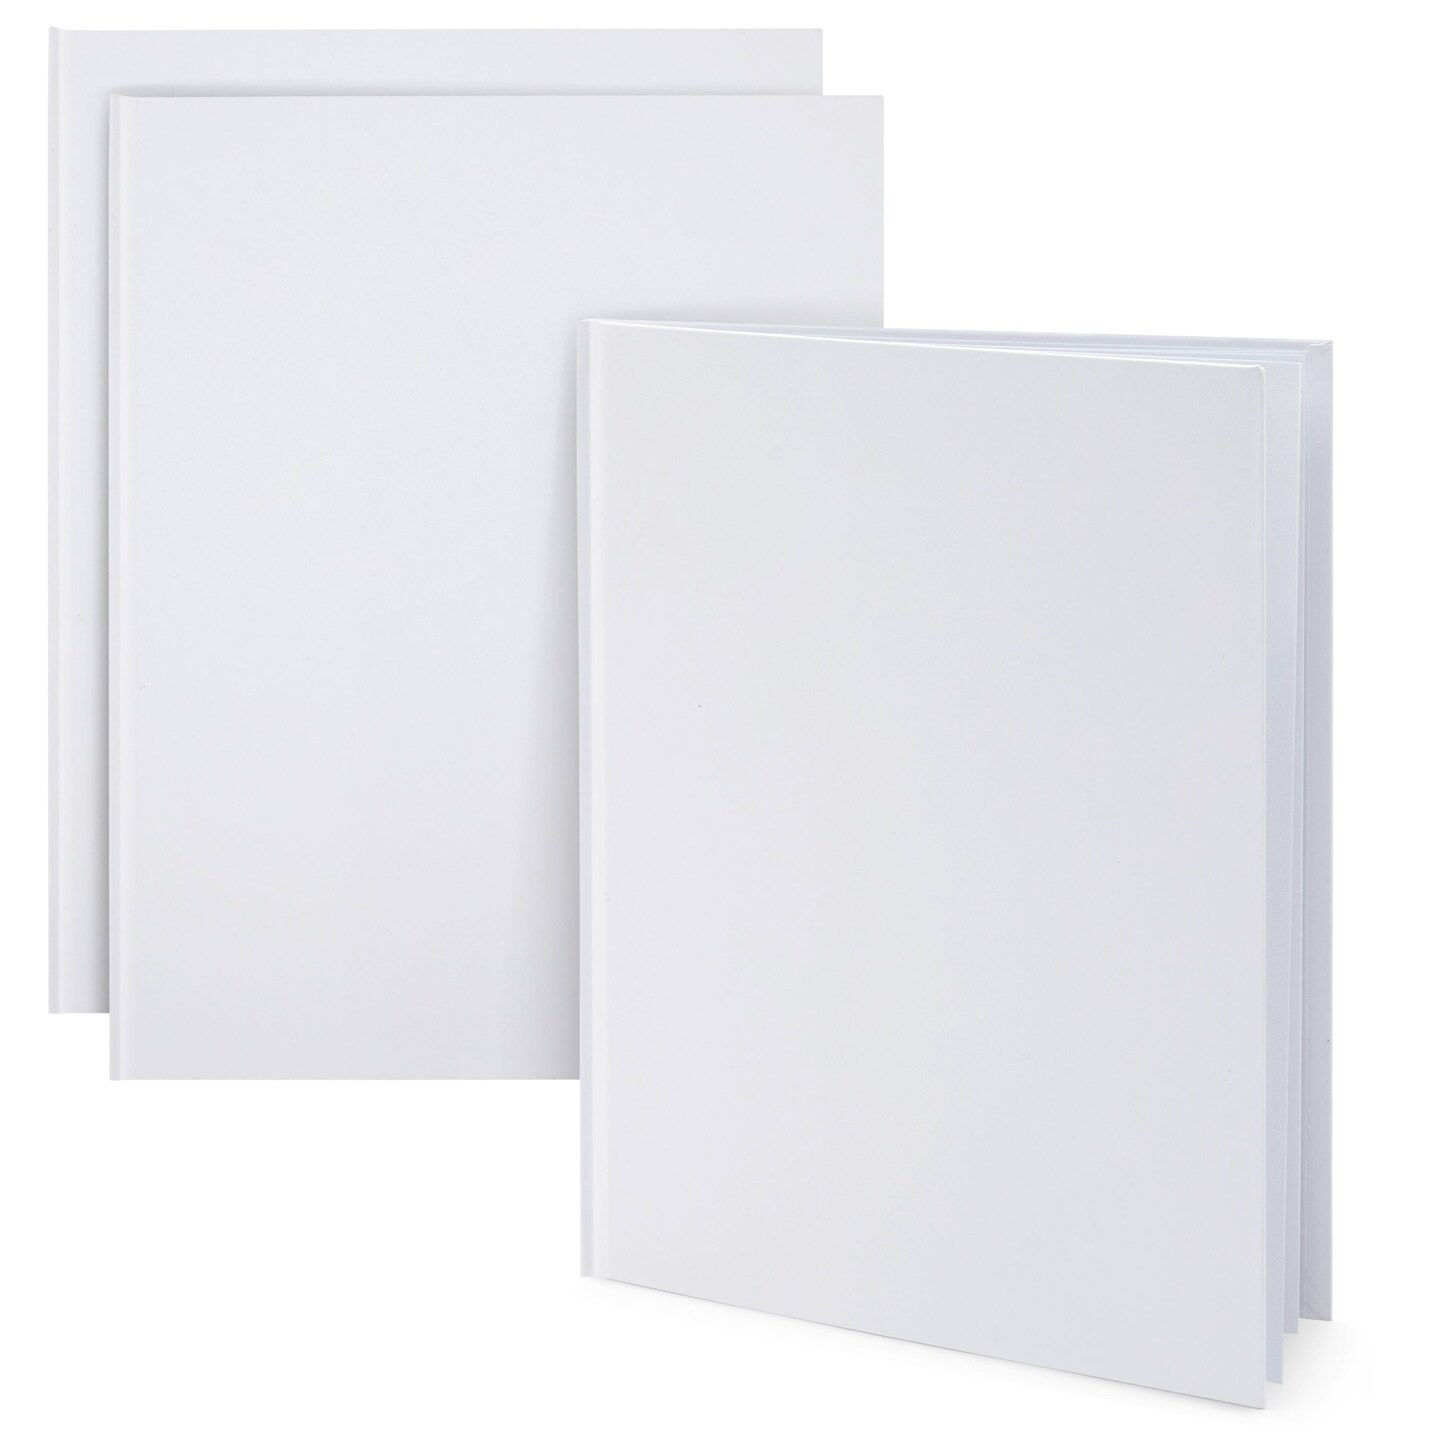 6 Pack Blank Books for Kids to Write Stories, Hardcover Sketchbooks for  Students, 36 Pages (White, 5 x 5 In)